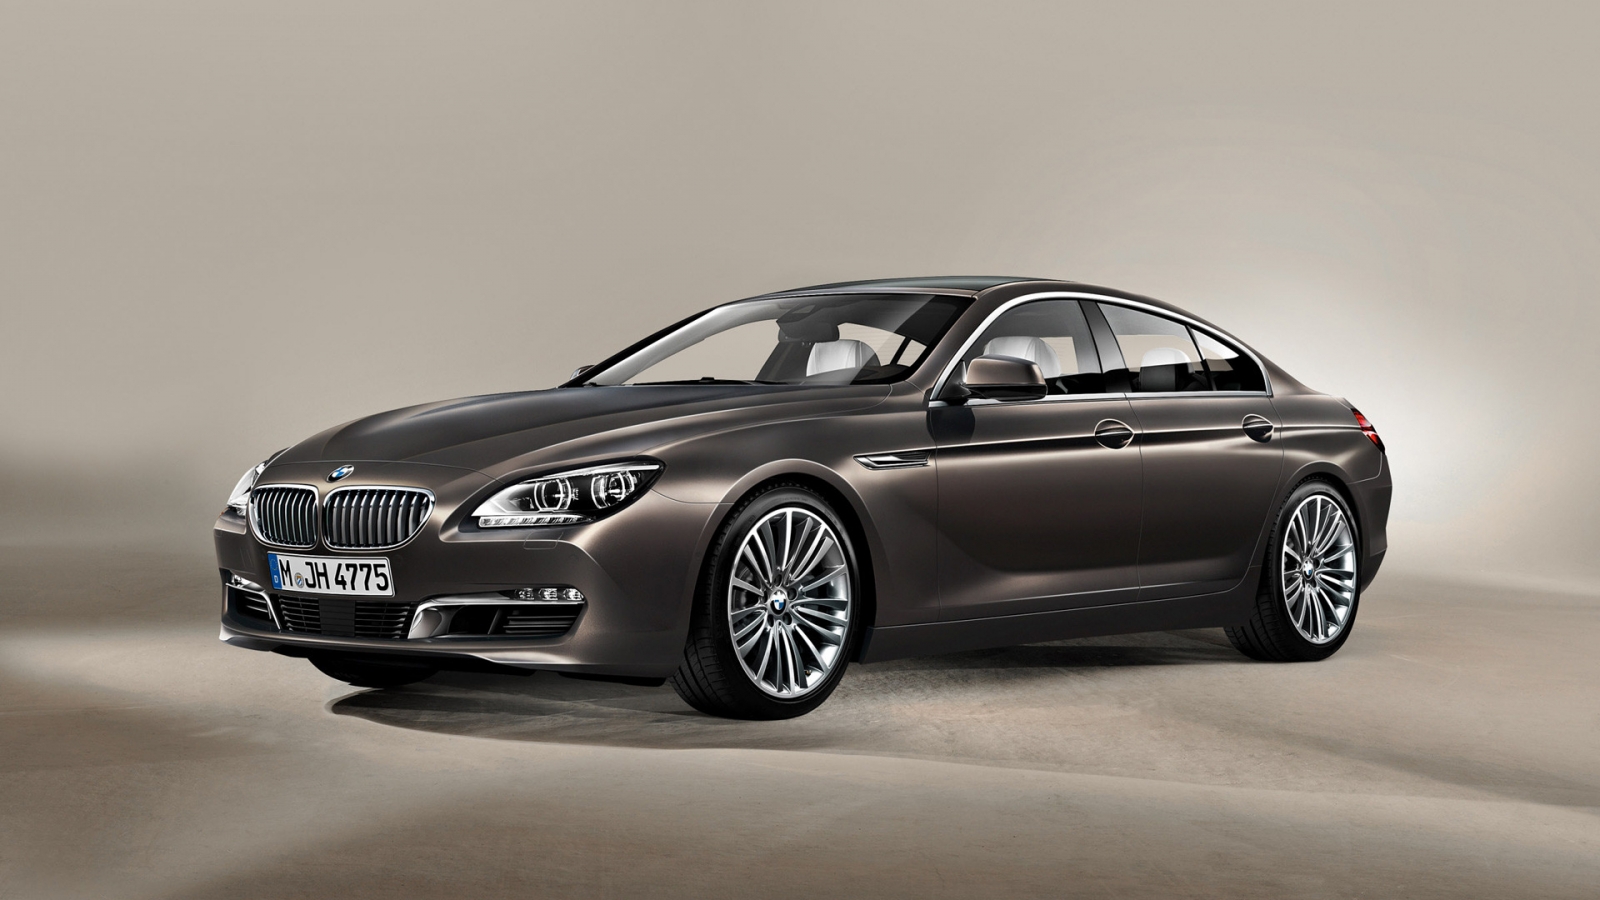 2013 BMW 6 Series Gran Coupe Studio for 1600 x 900 HDTV resolution